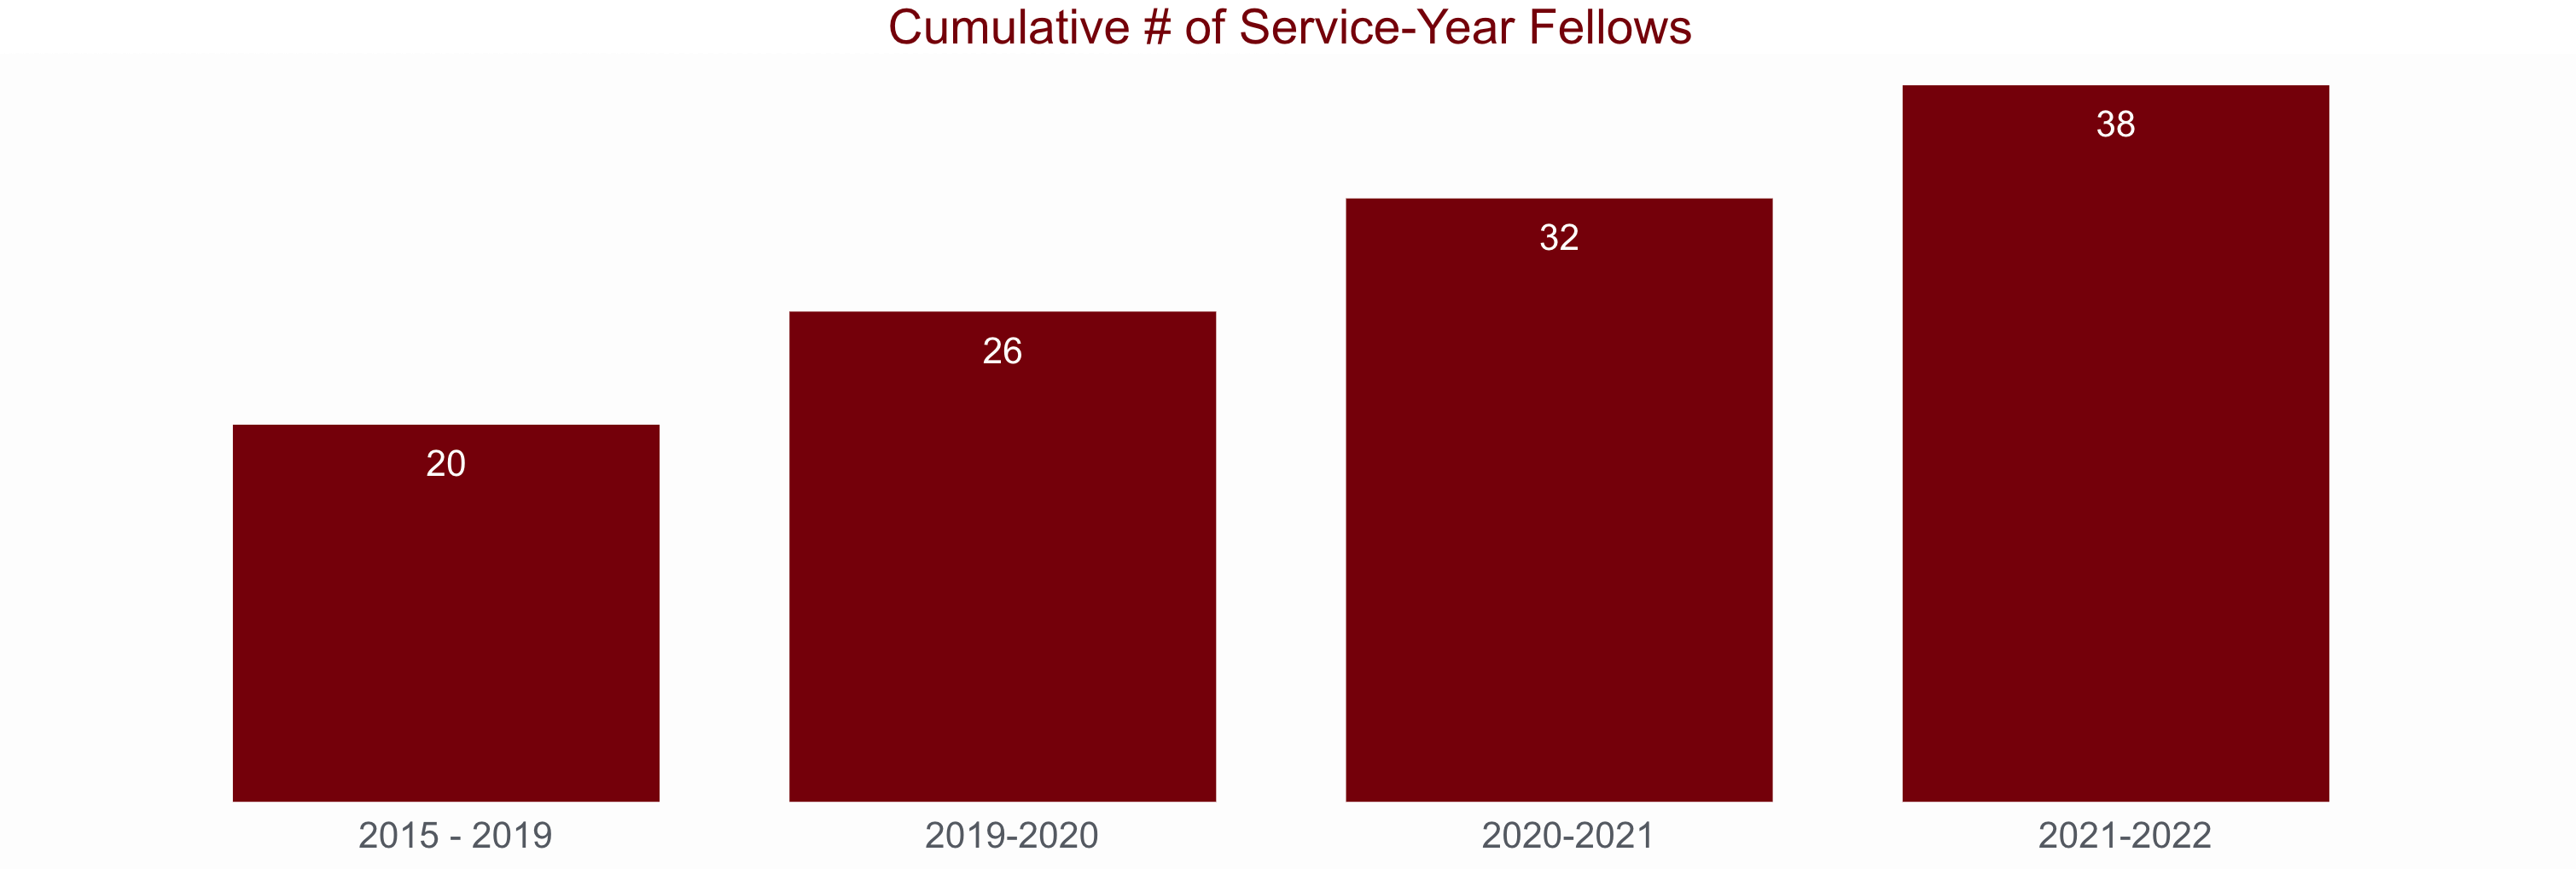 Bar chart showing the cumulative number of service-year fellows